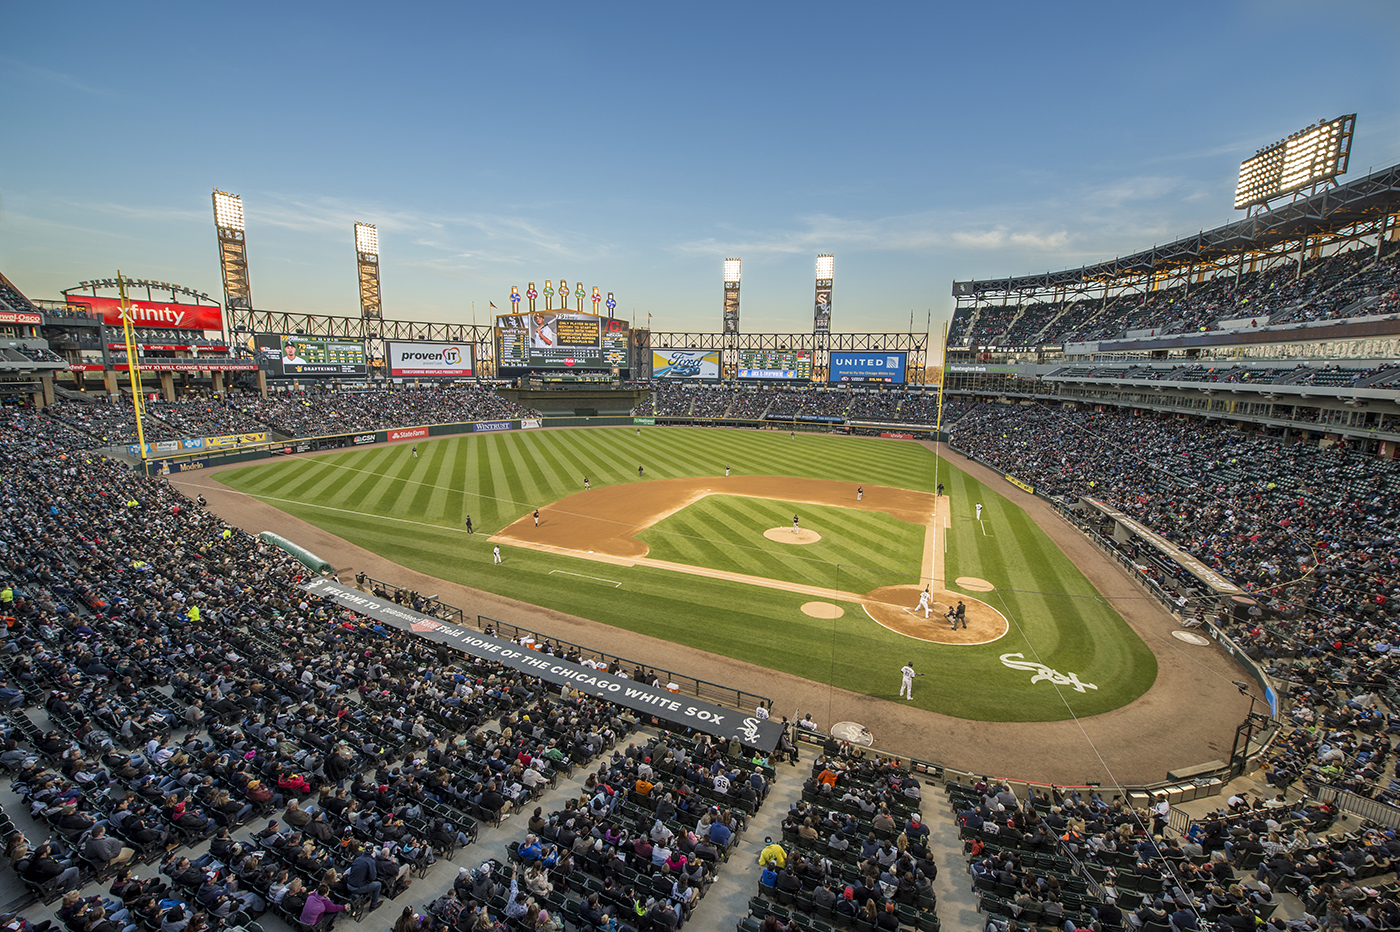 Chicago White Sox   Find Major League Baseball Games, Events ...